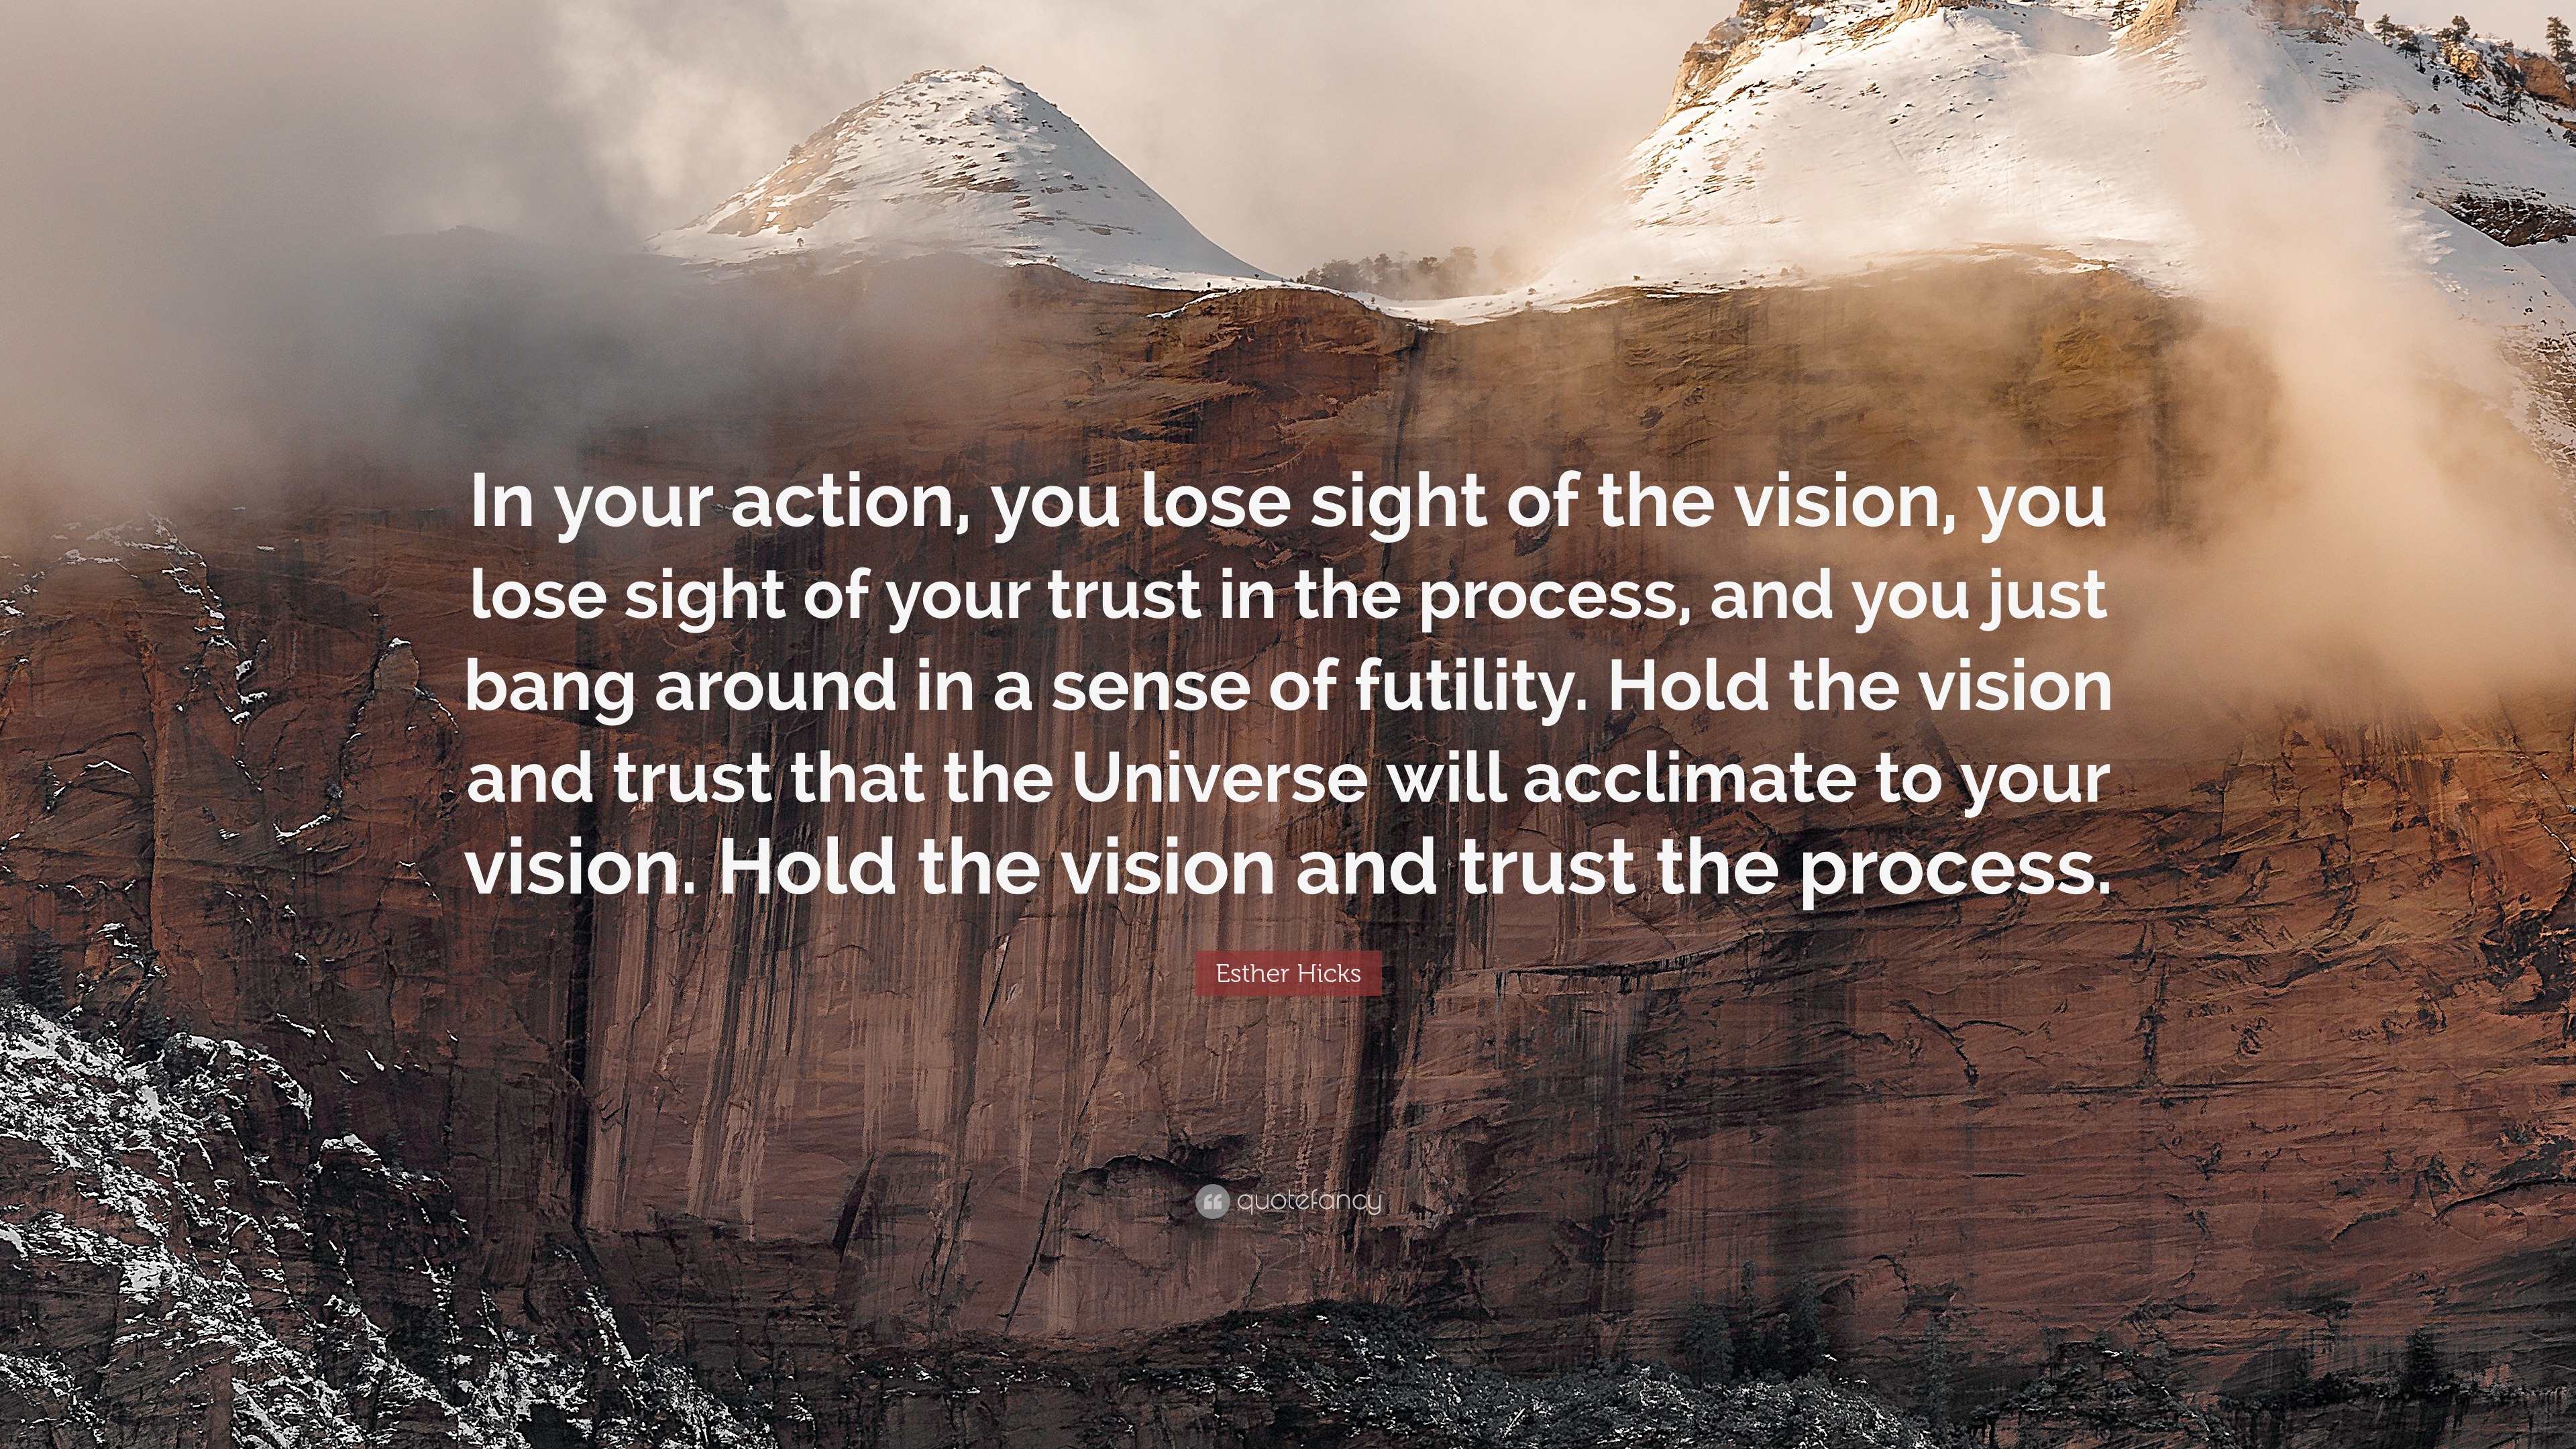 Esther Hicks Quote: “In your action, you lose sight of the vision, you